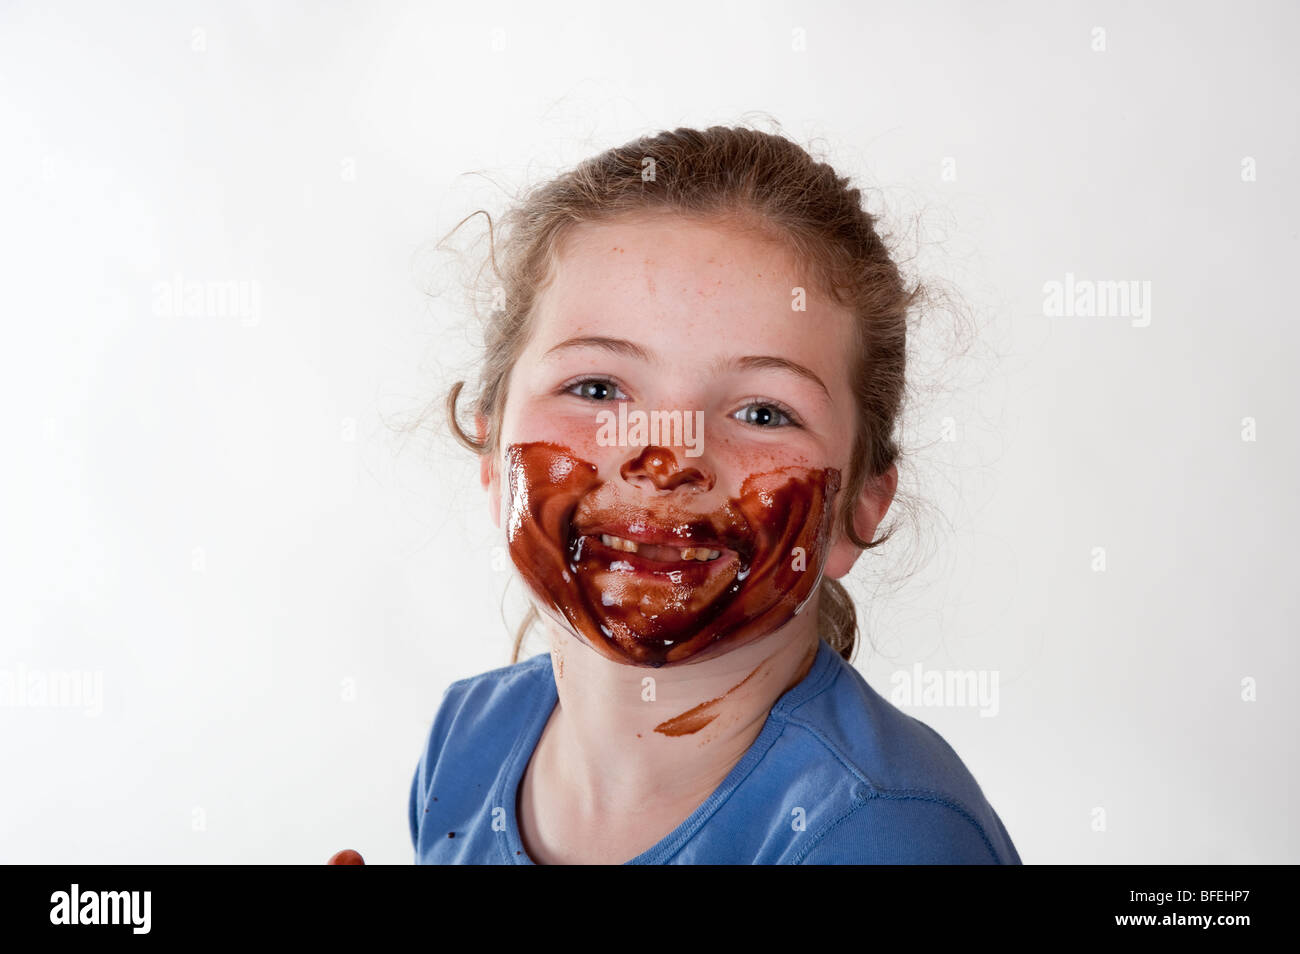 little girl with chocolate covered face Stock Photo